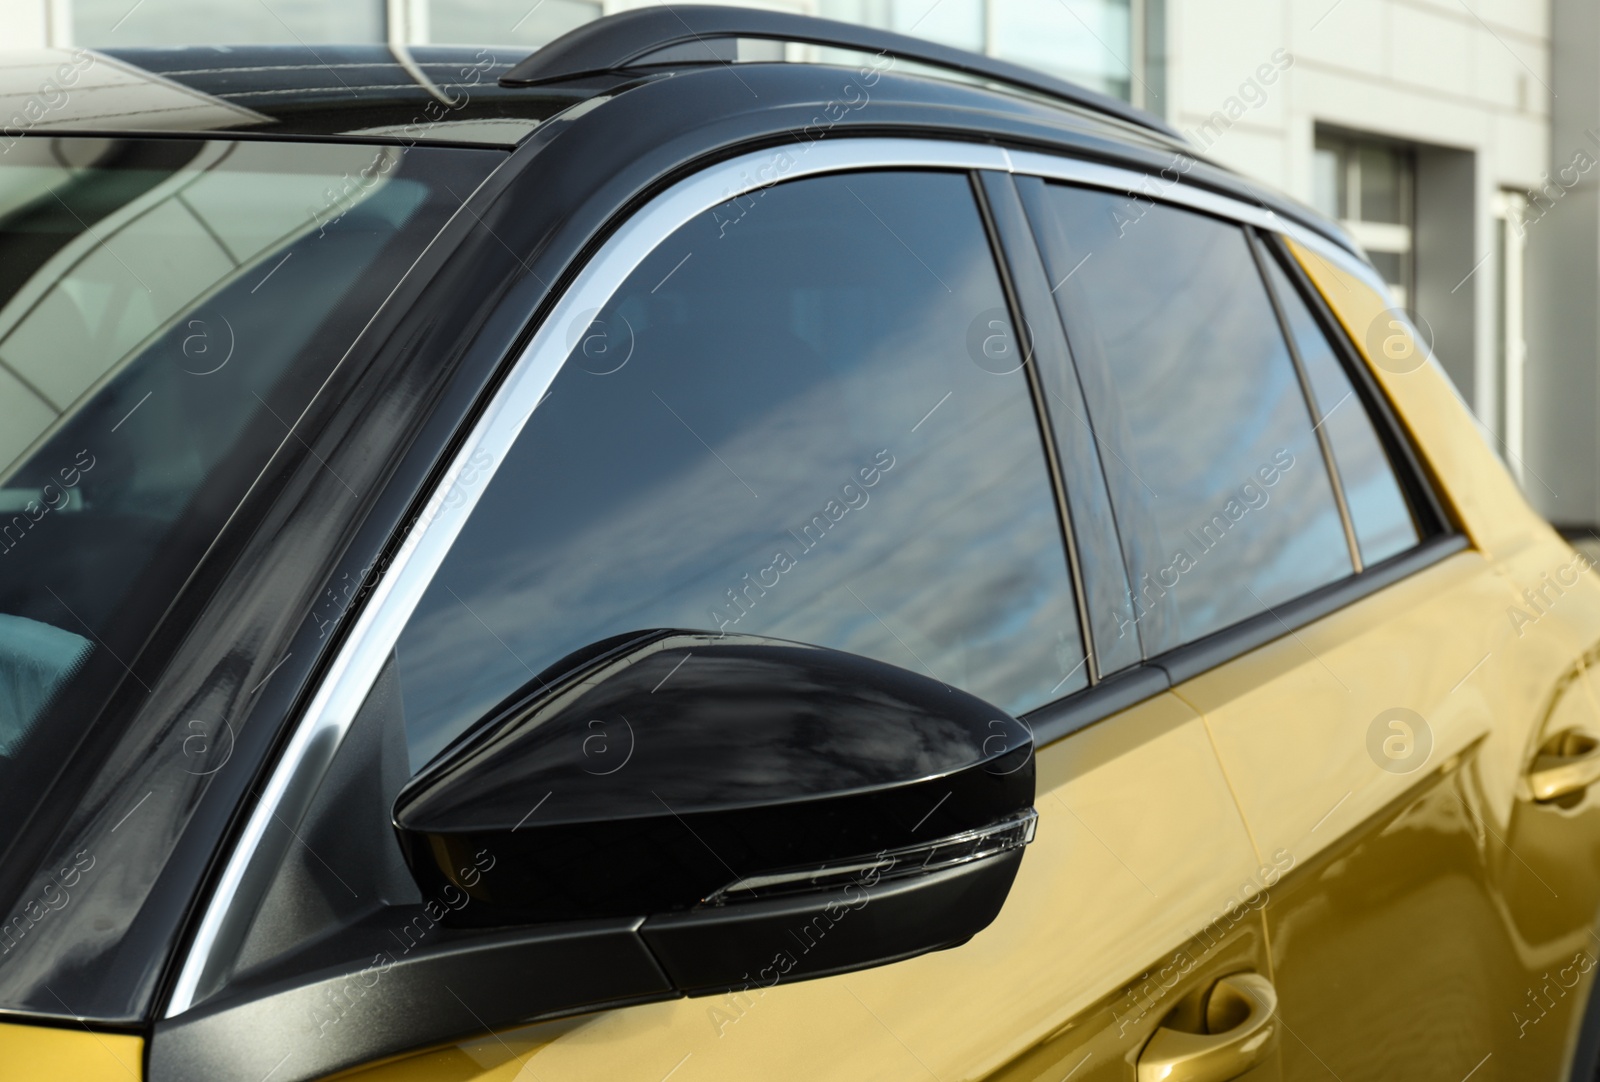 Photo of Modern car with tinting foil on window outdoors, closeup